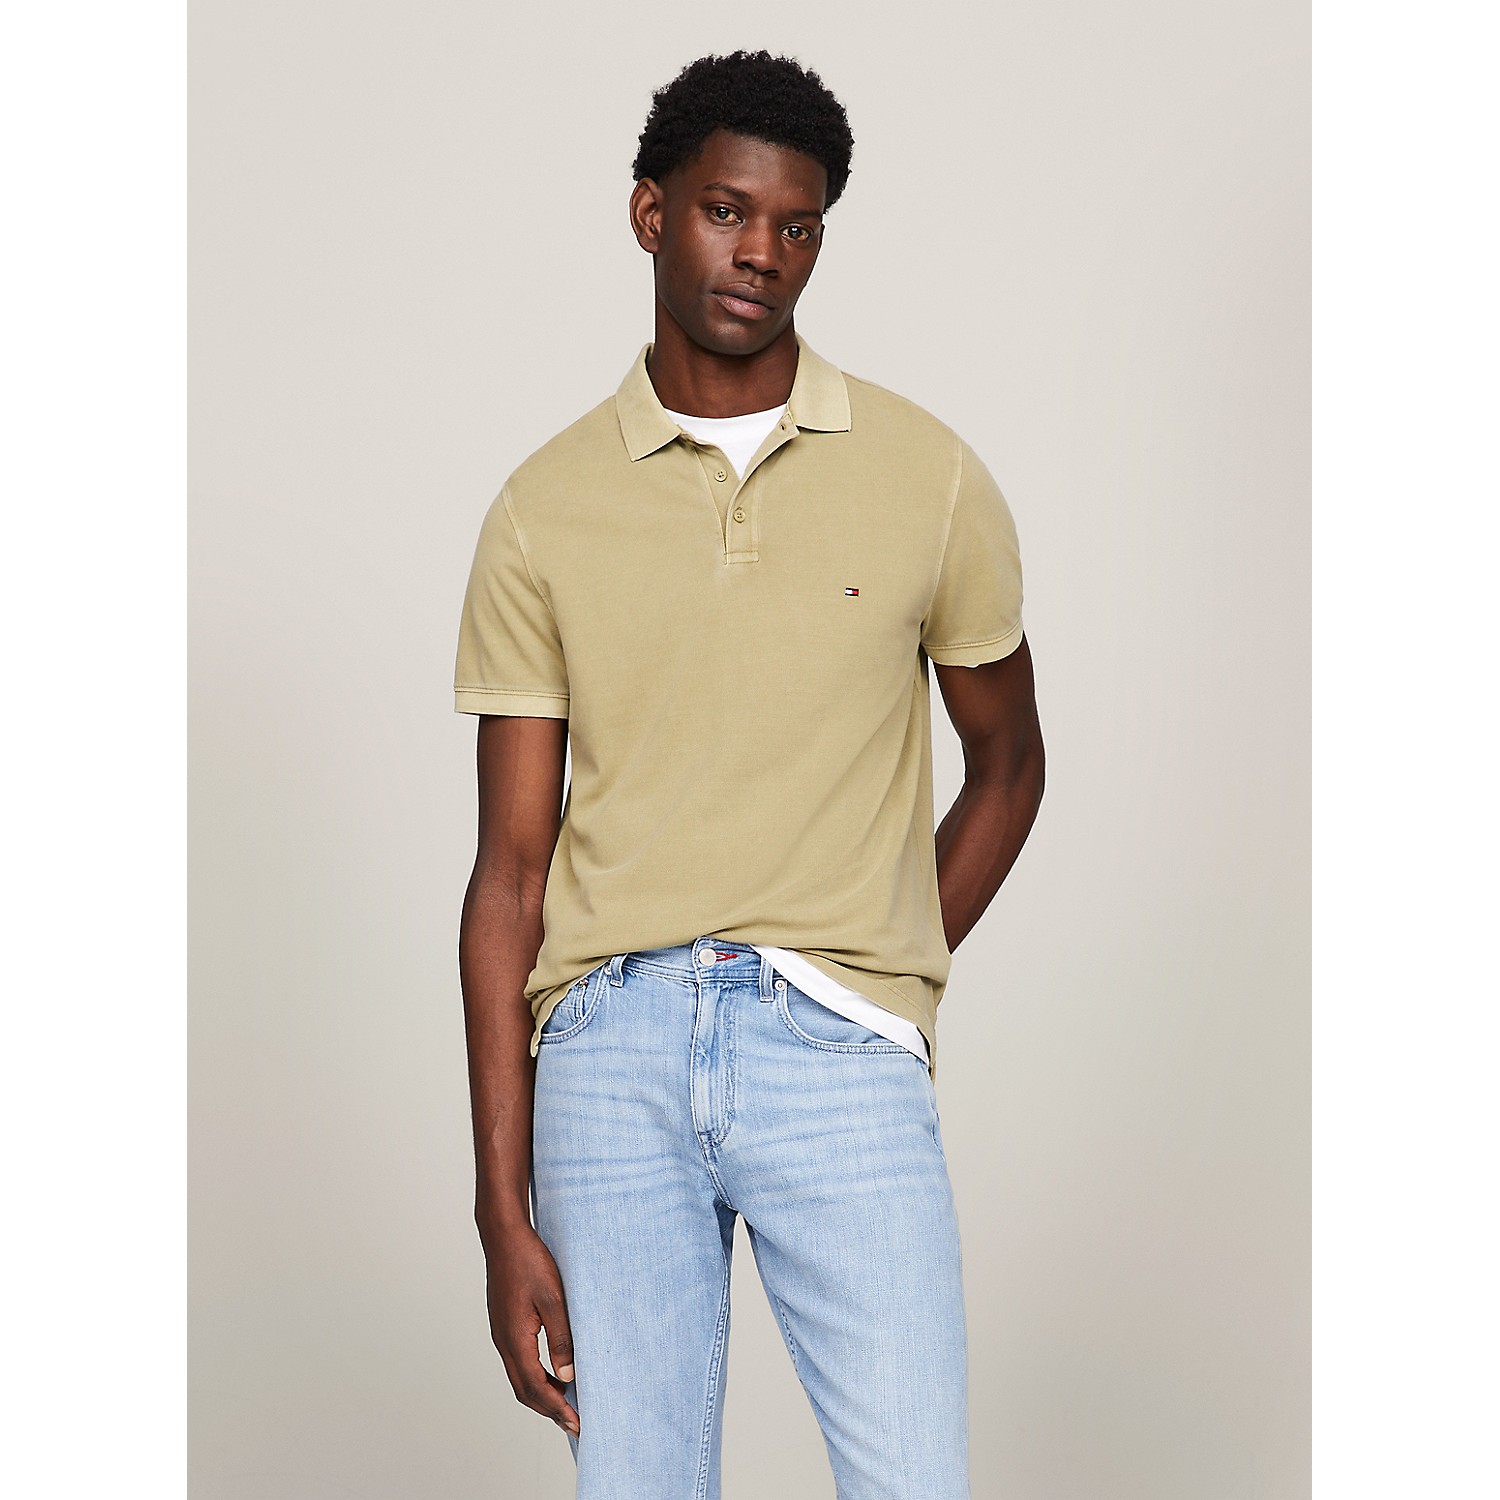 TOMMY HILFIGER Regular Fit Garment-Dyed Polo